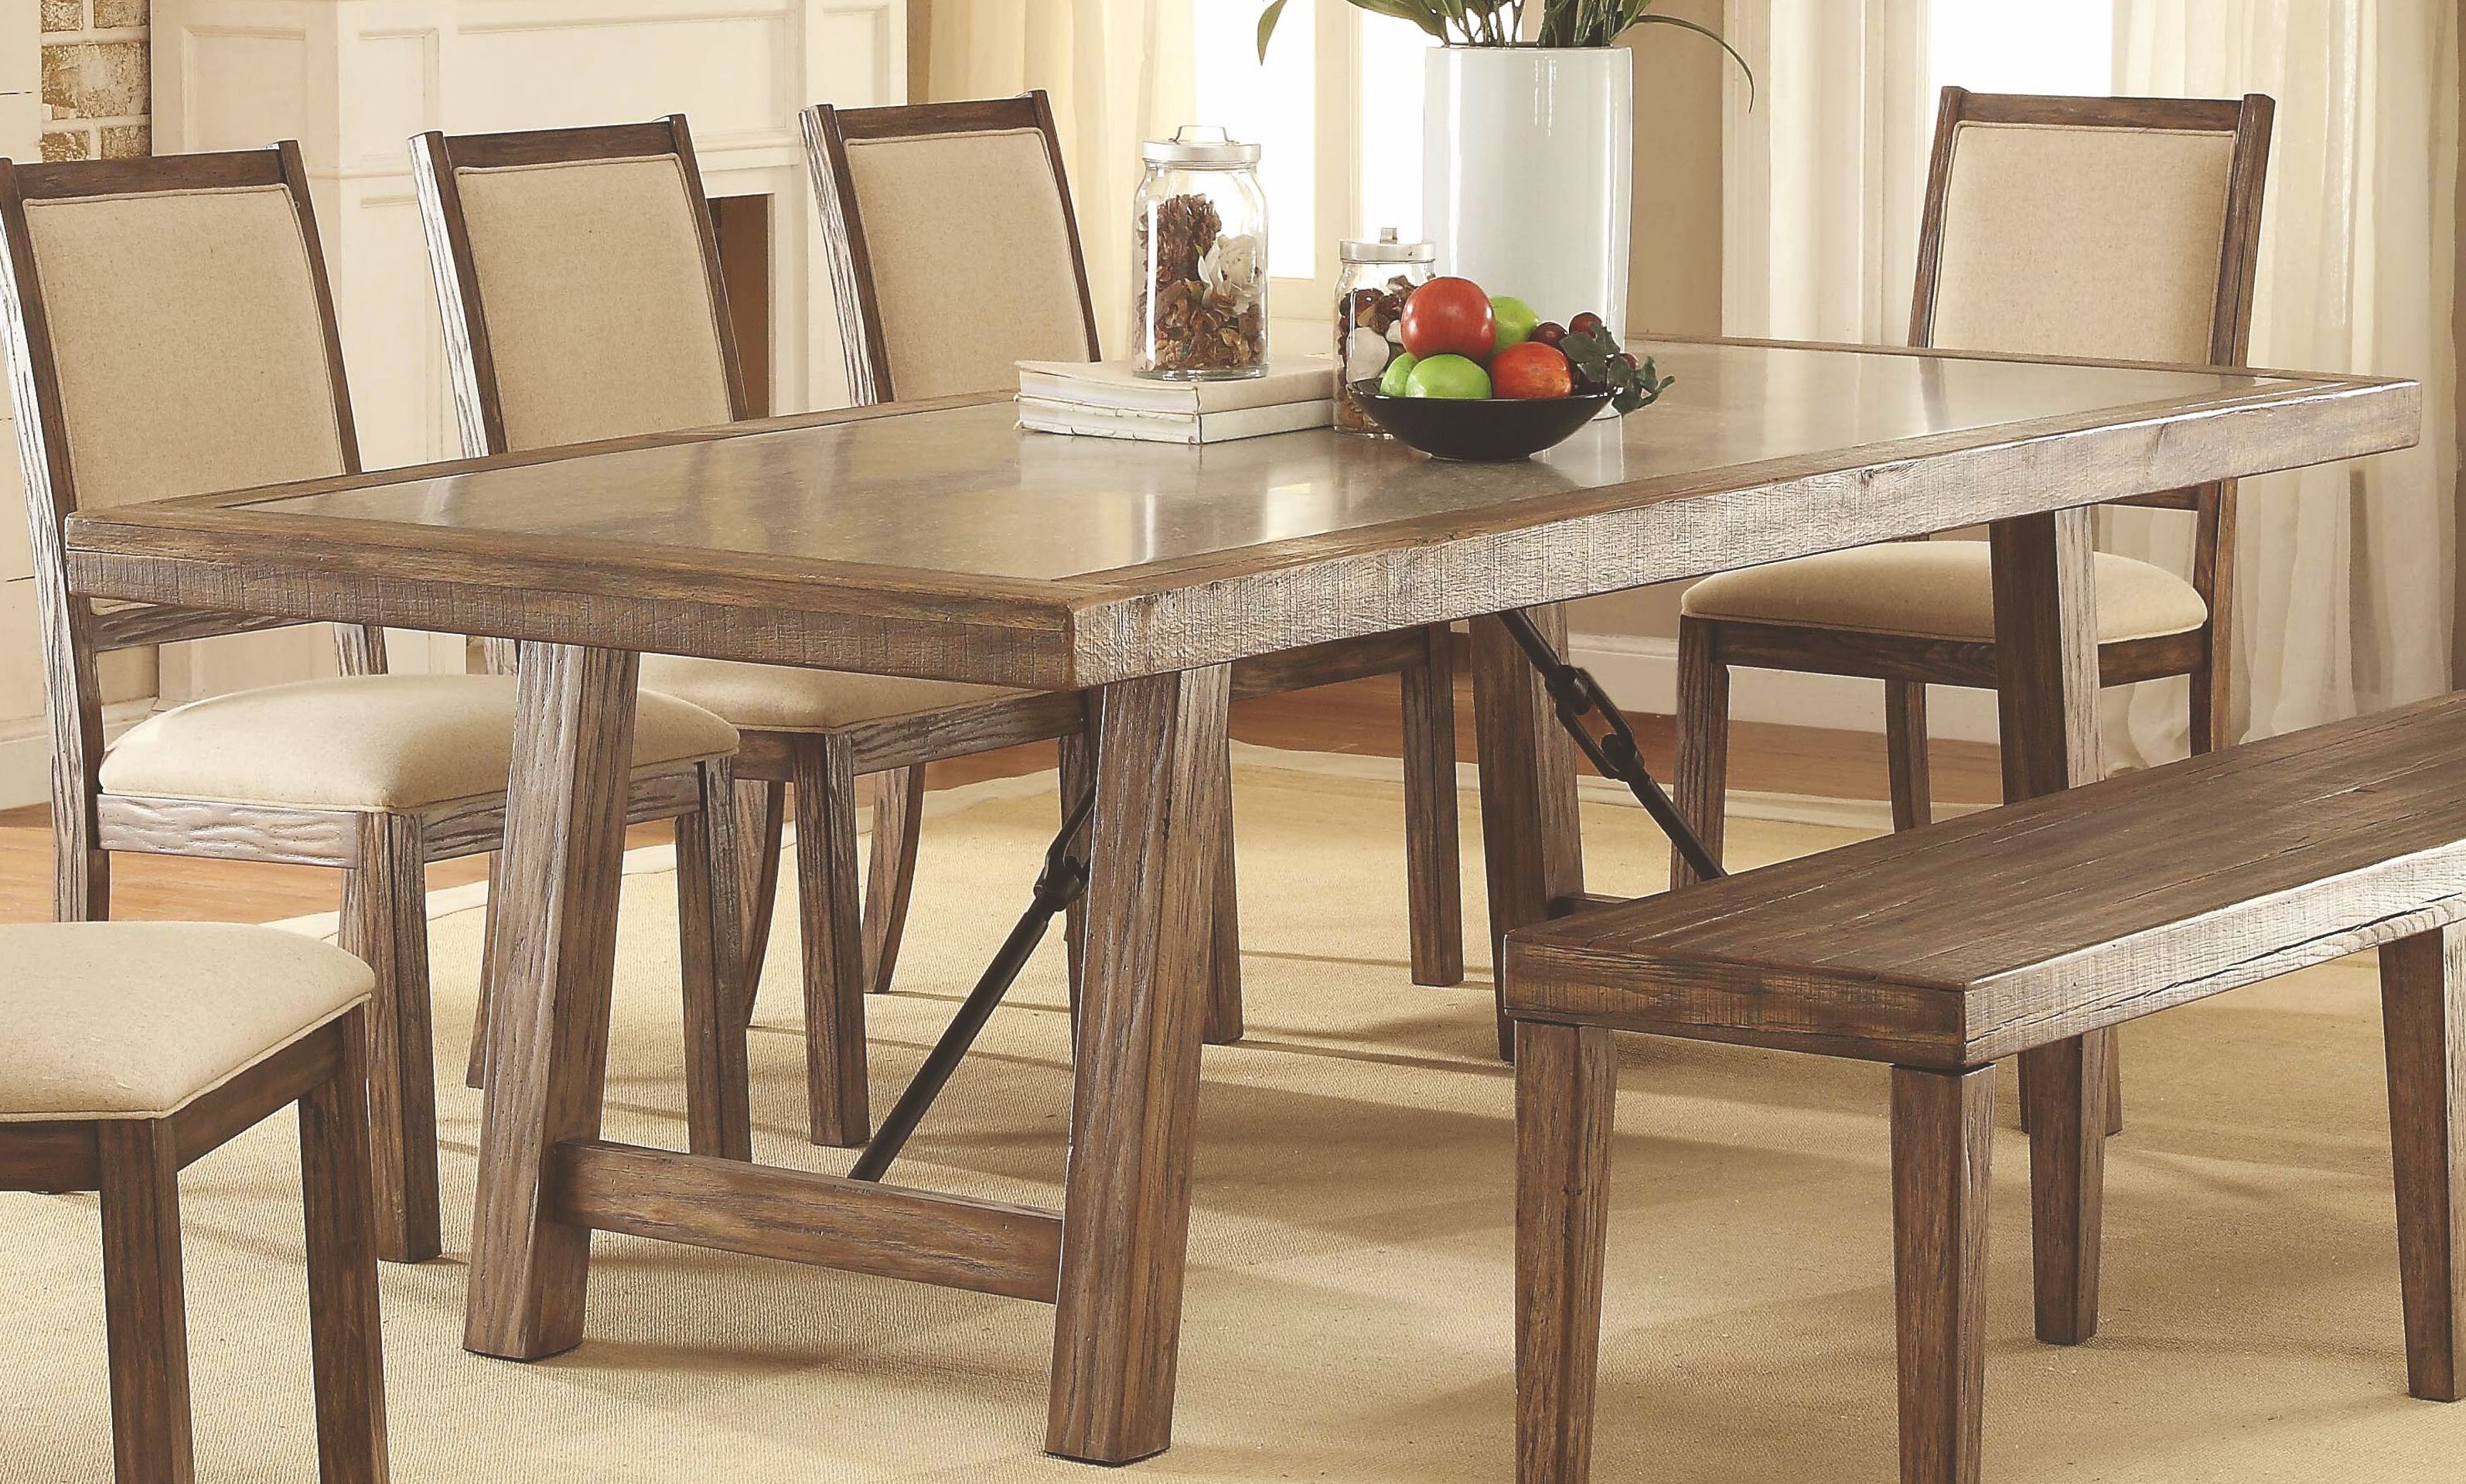 New Rustic Dining Room Tables for Large Space